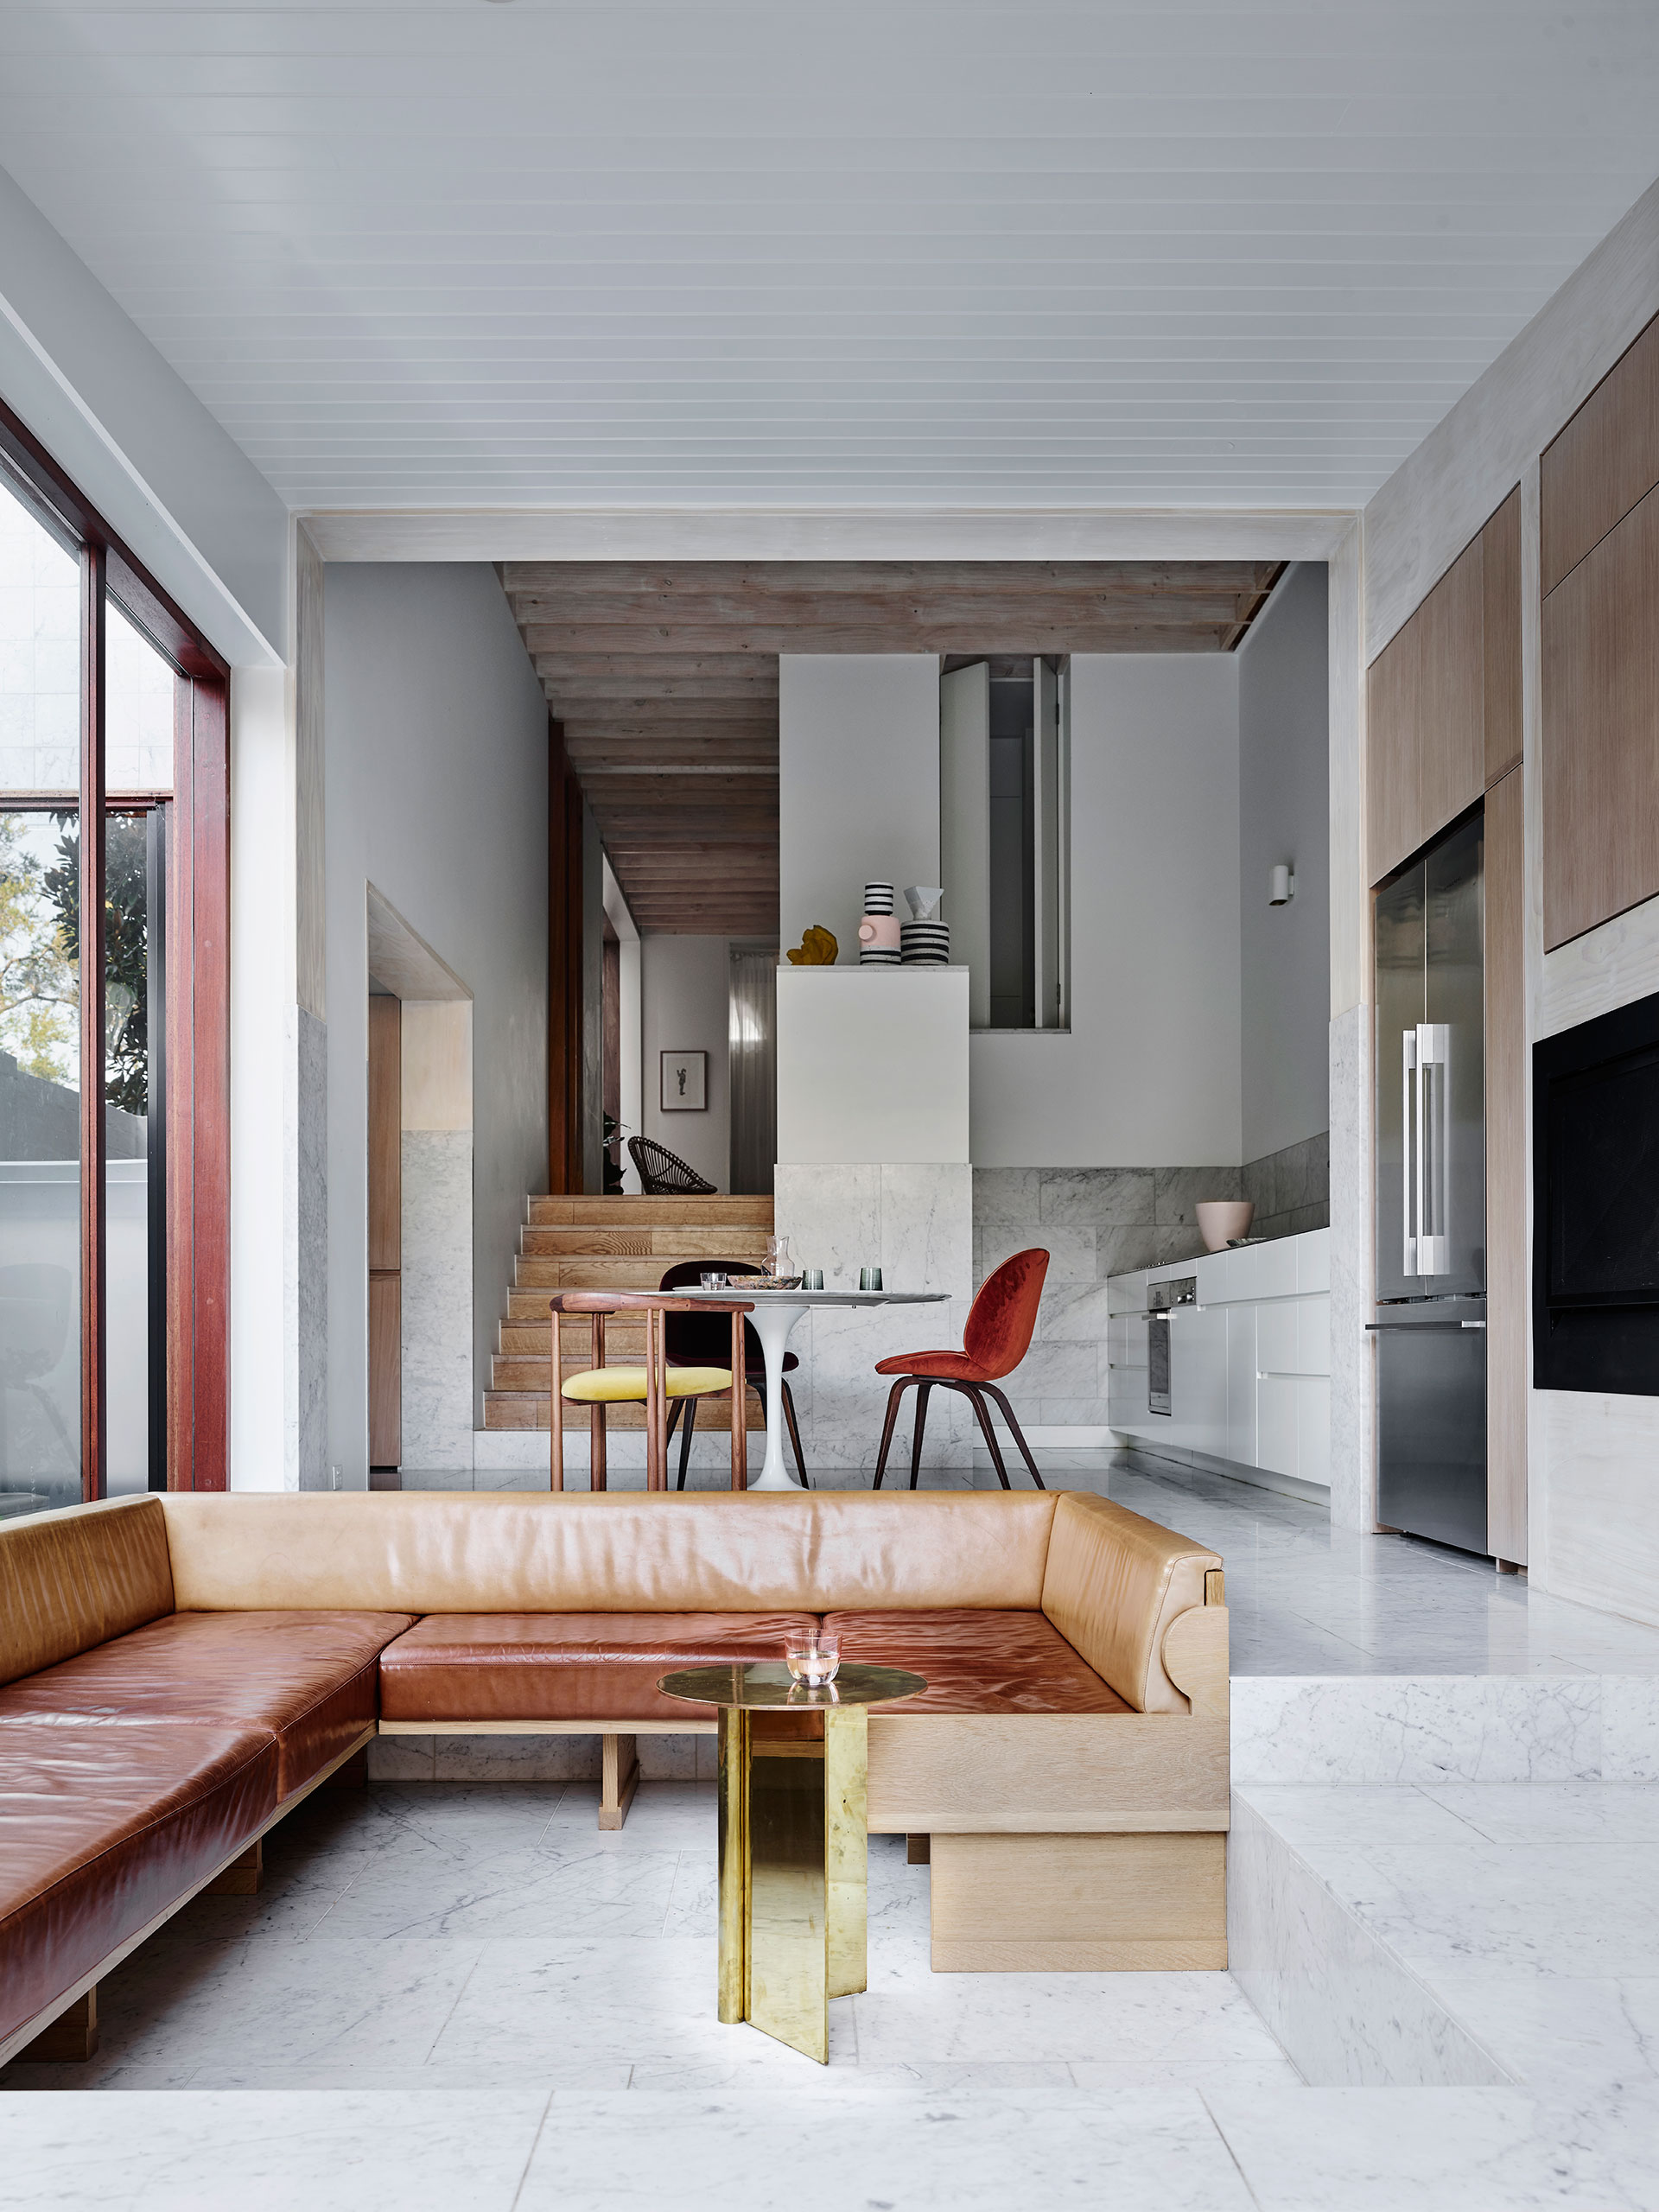 Bondi Junction House by Alexander &amp; CO.
Photography by Anson Smart.